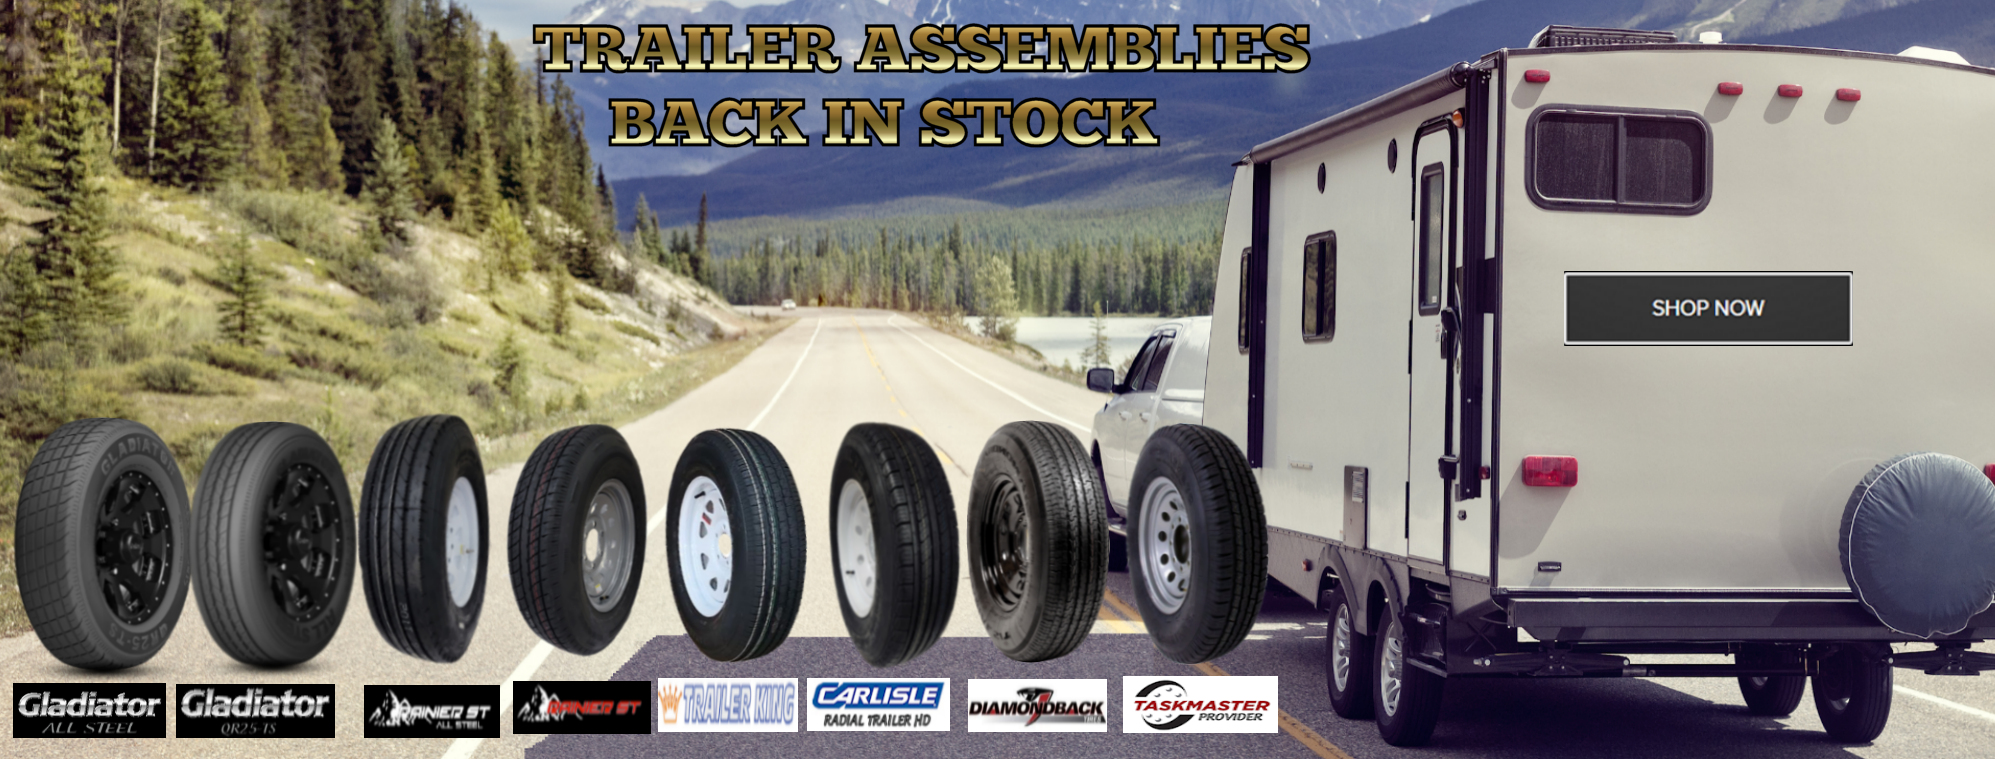 Tires for Sale Online | Tires4That by Gallagher Tire | gallaghertire ...